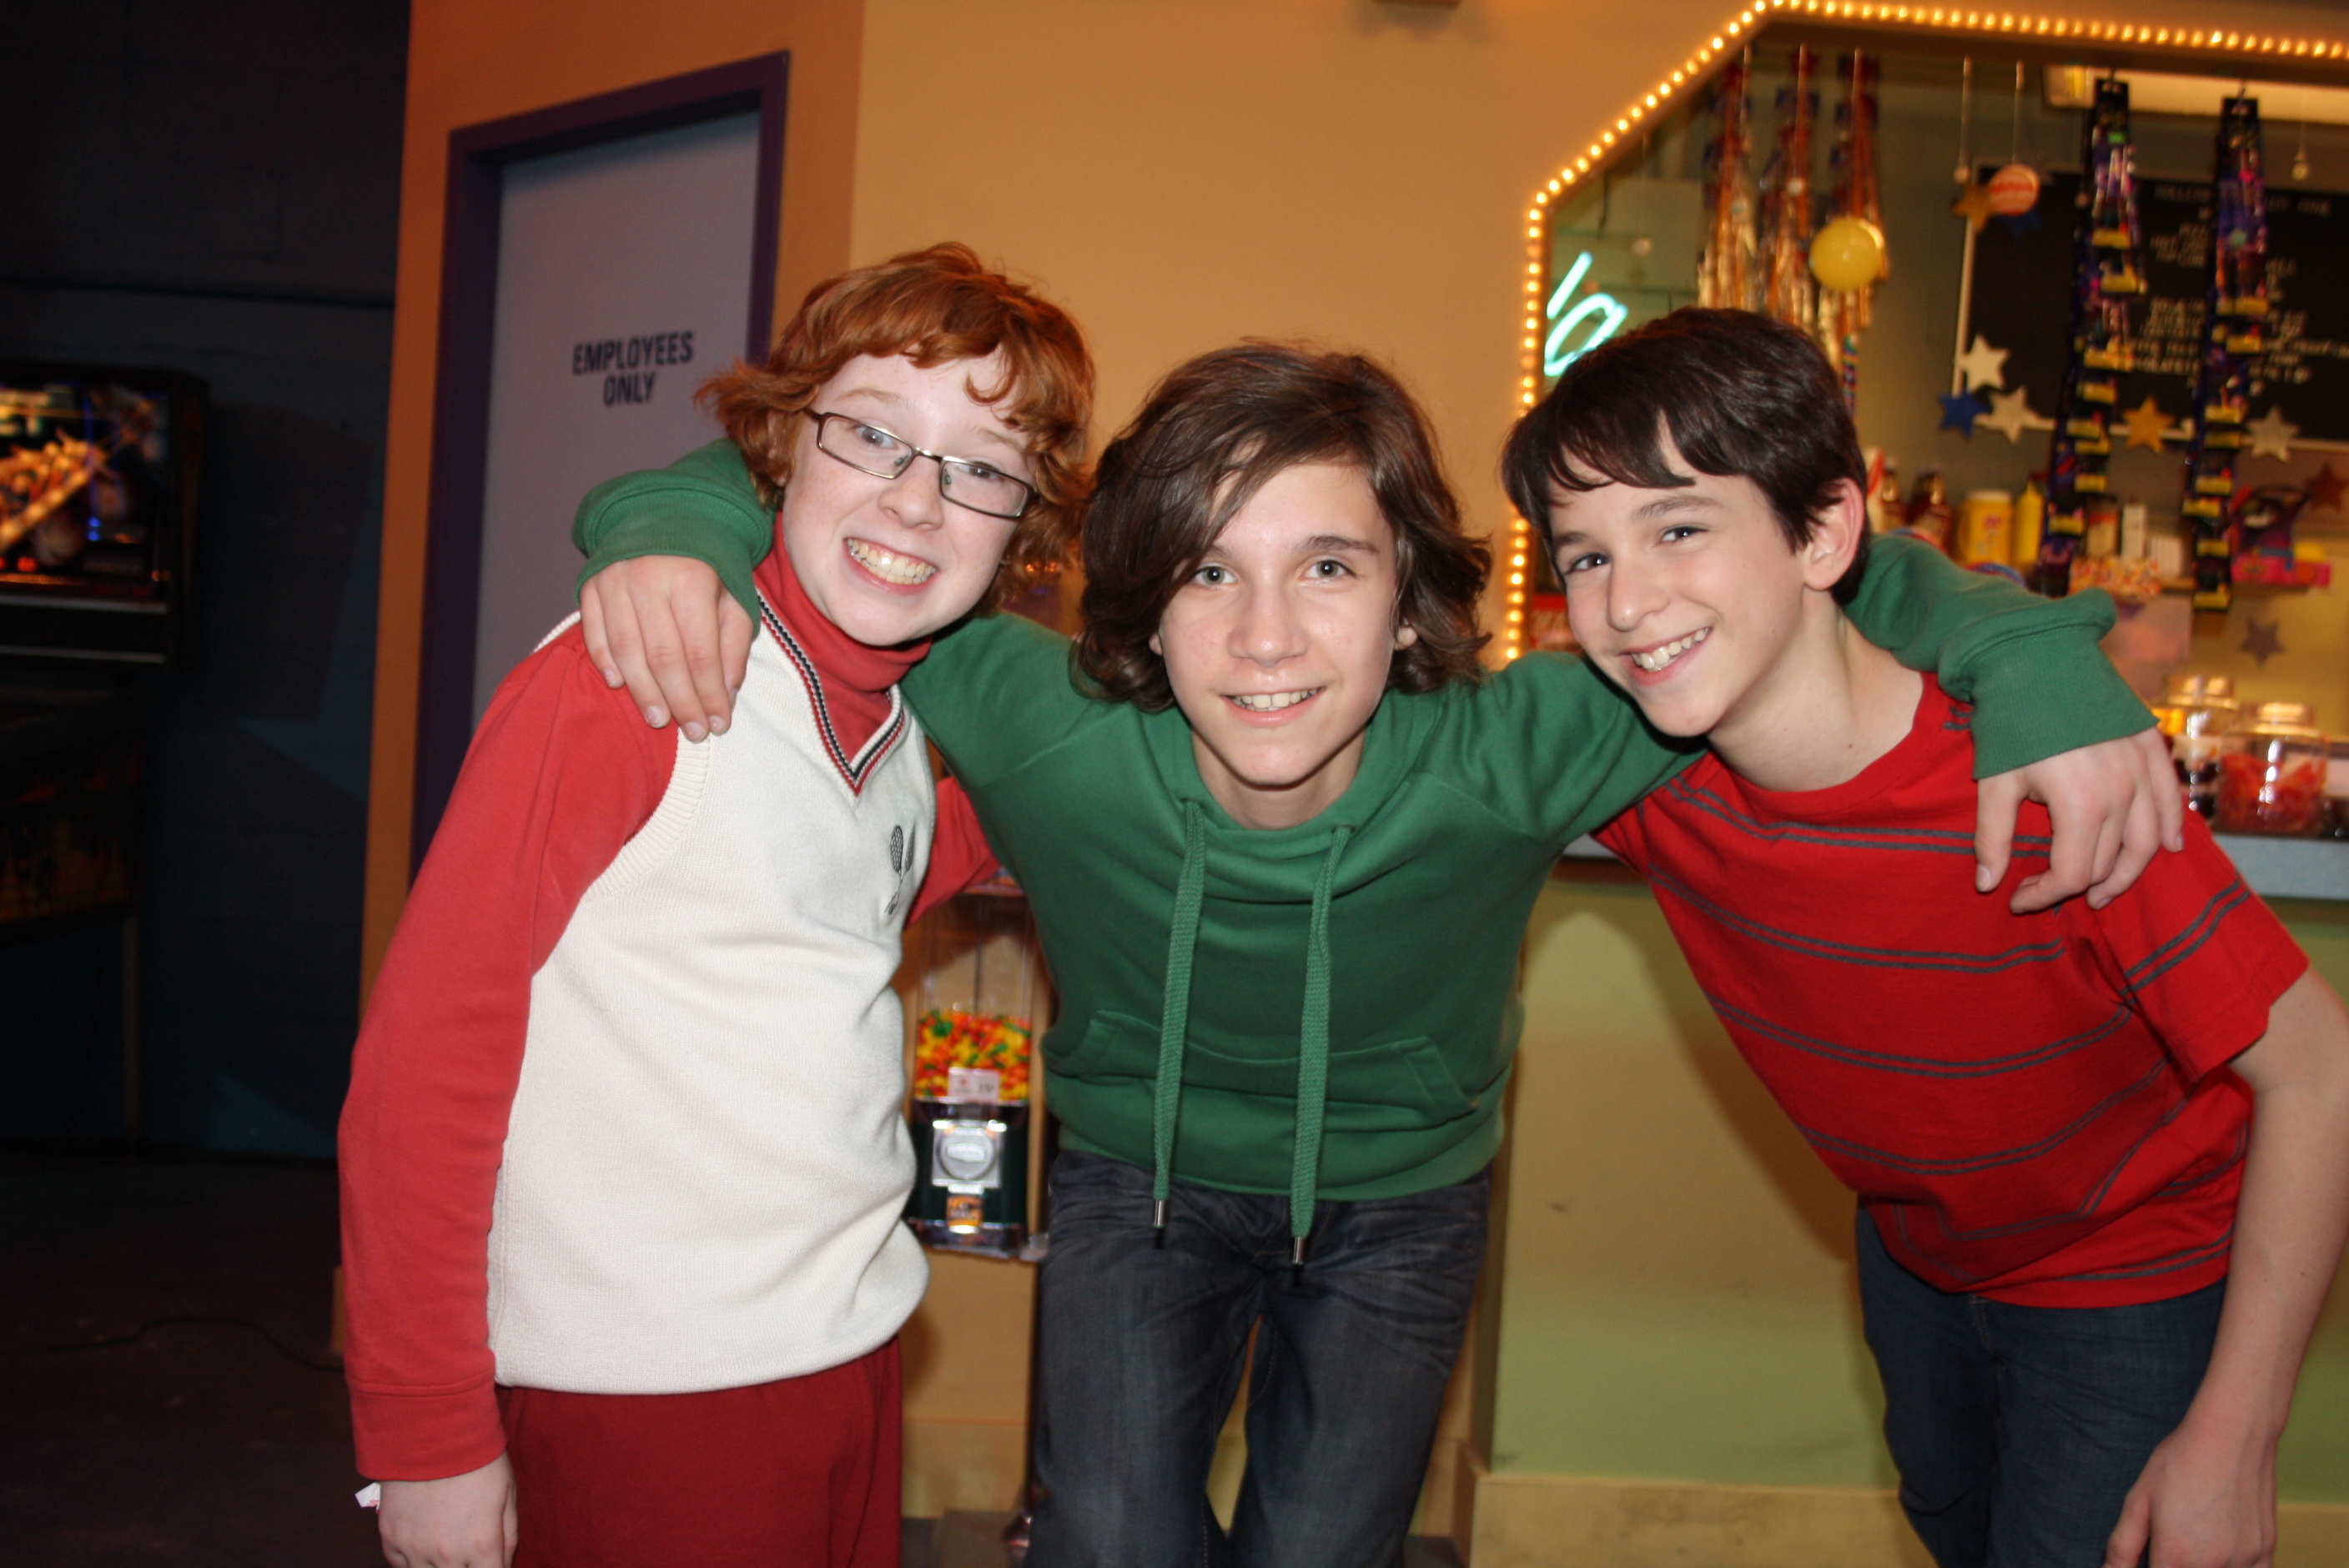 Sean Mathieson with Zach Gordon (as Greg Heffley) and Grayson Russel (as Fregley) on set of Diary of a Wimpy Kid 2